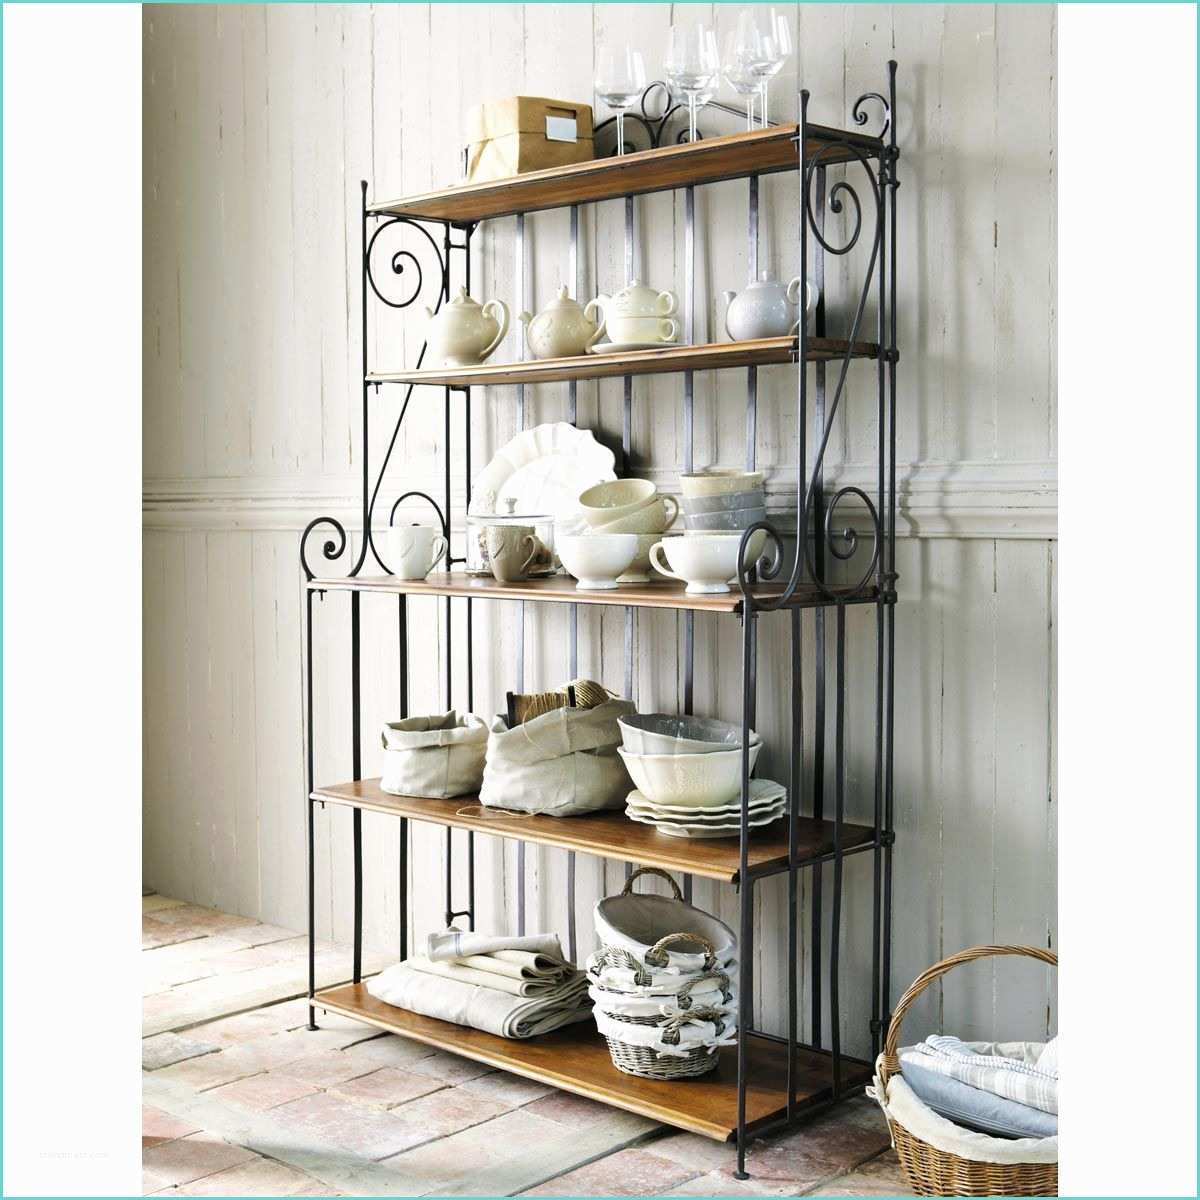 Etagere Fer forge Alinea Support Etagere Fer forge Fashion Designs